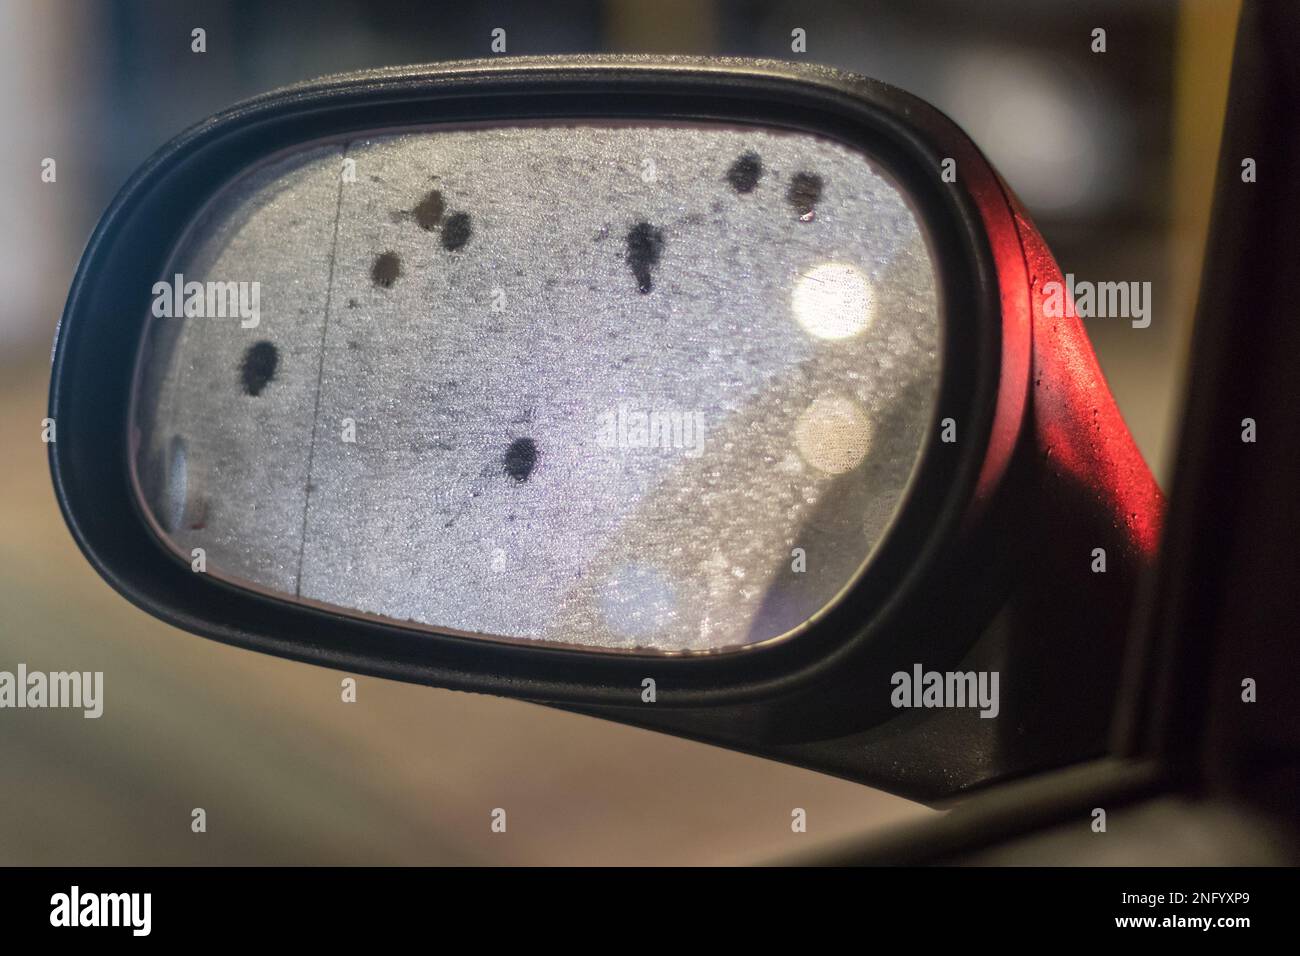 Lef side mirror on car at night reflects a city lights and  water drops. Close up view of bright blurred background. Stock Photo